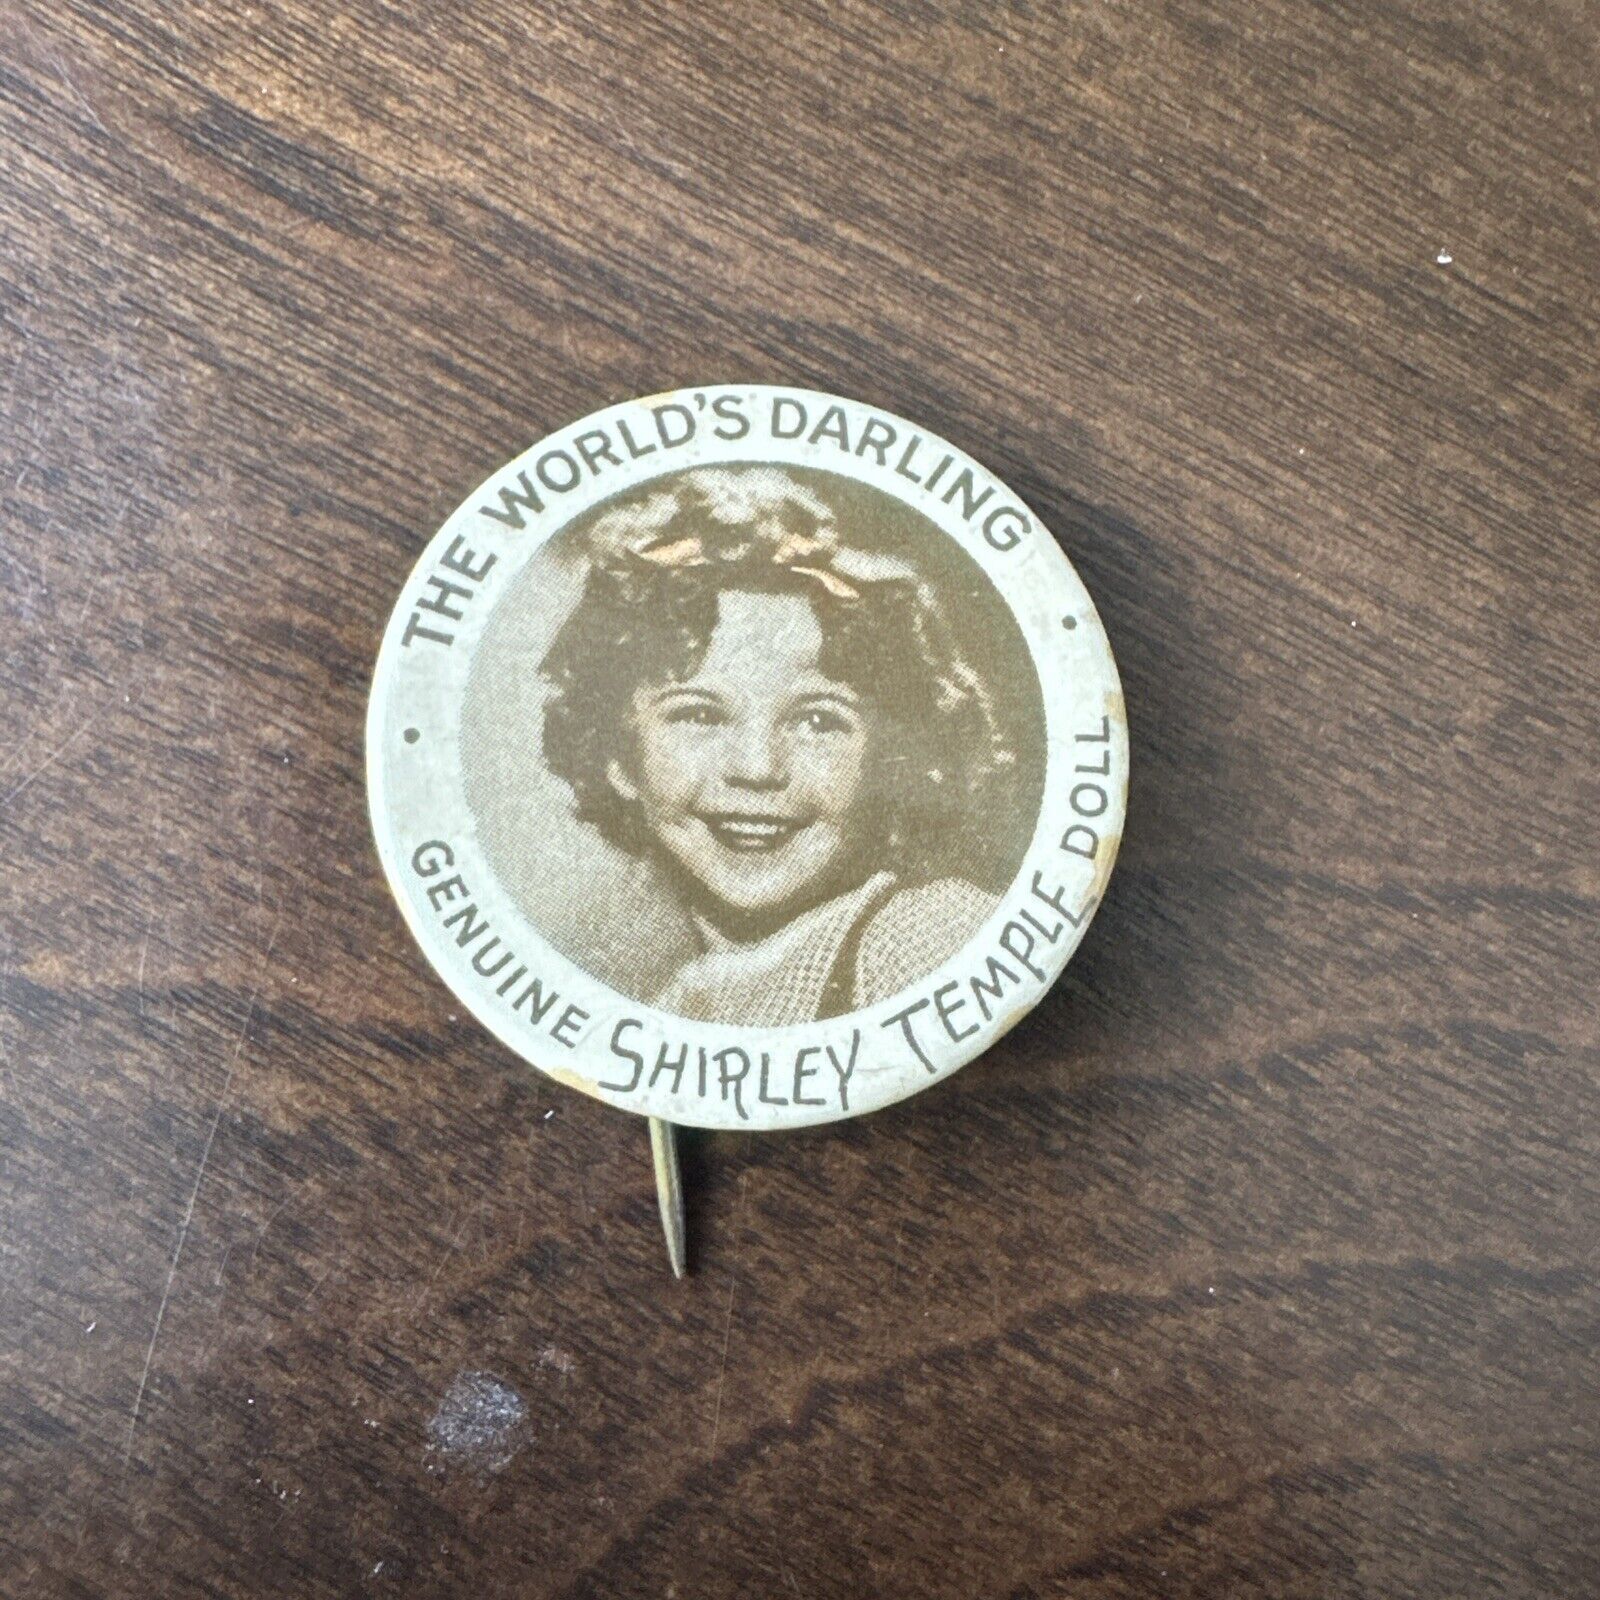 Shirley Temple Portrait 1930's Pin Button ~ The Worlds Darling